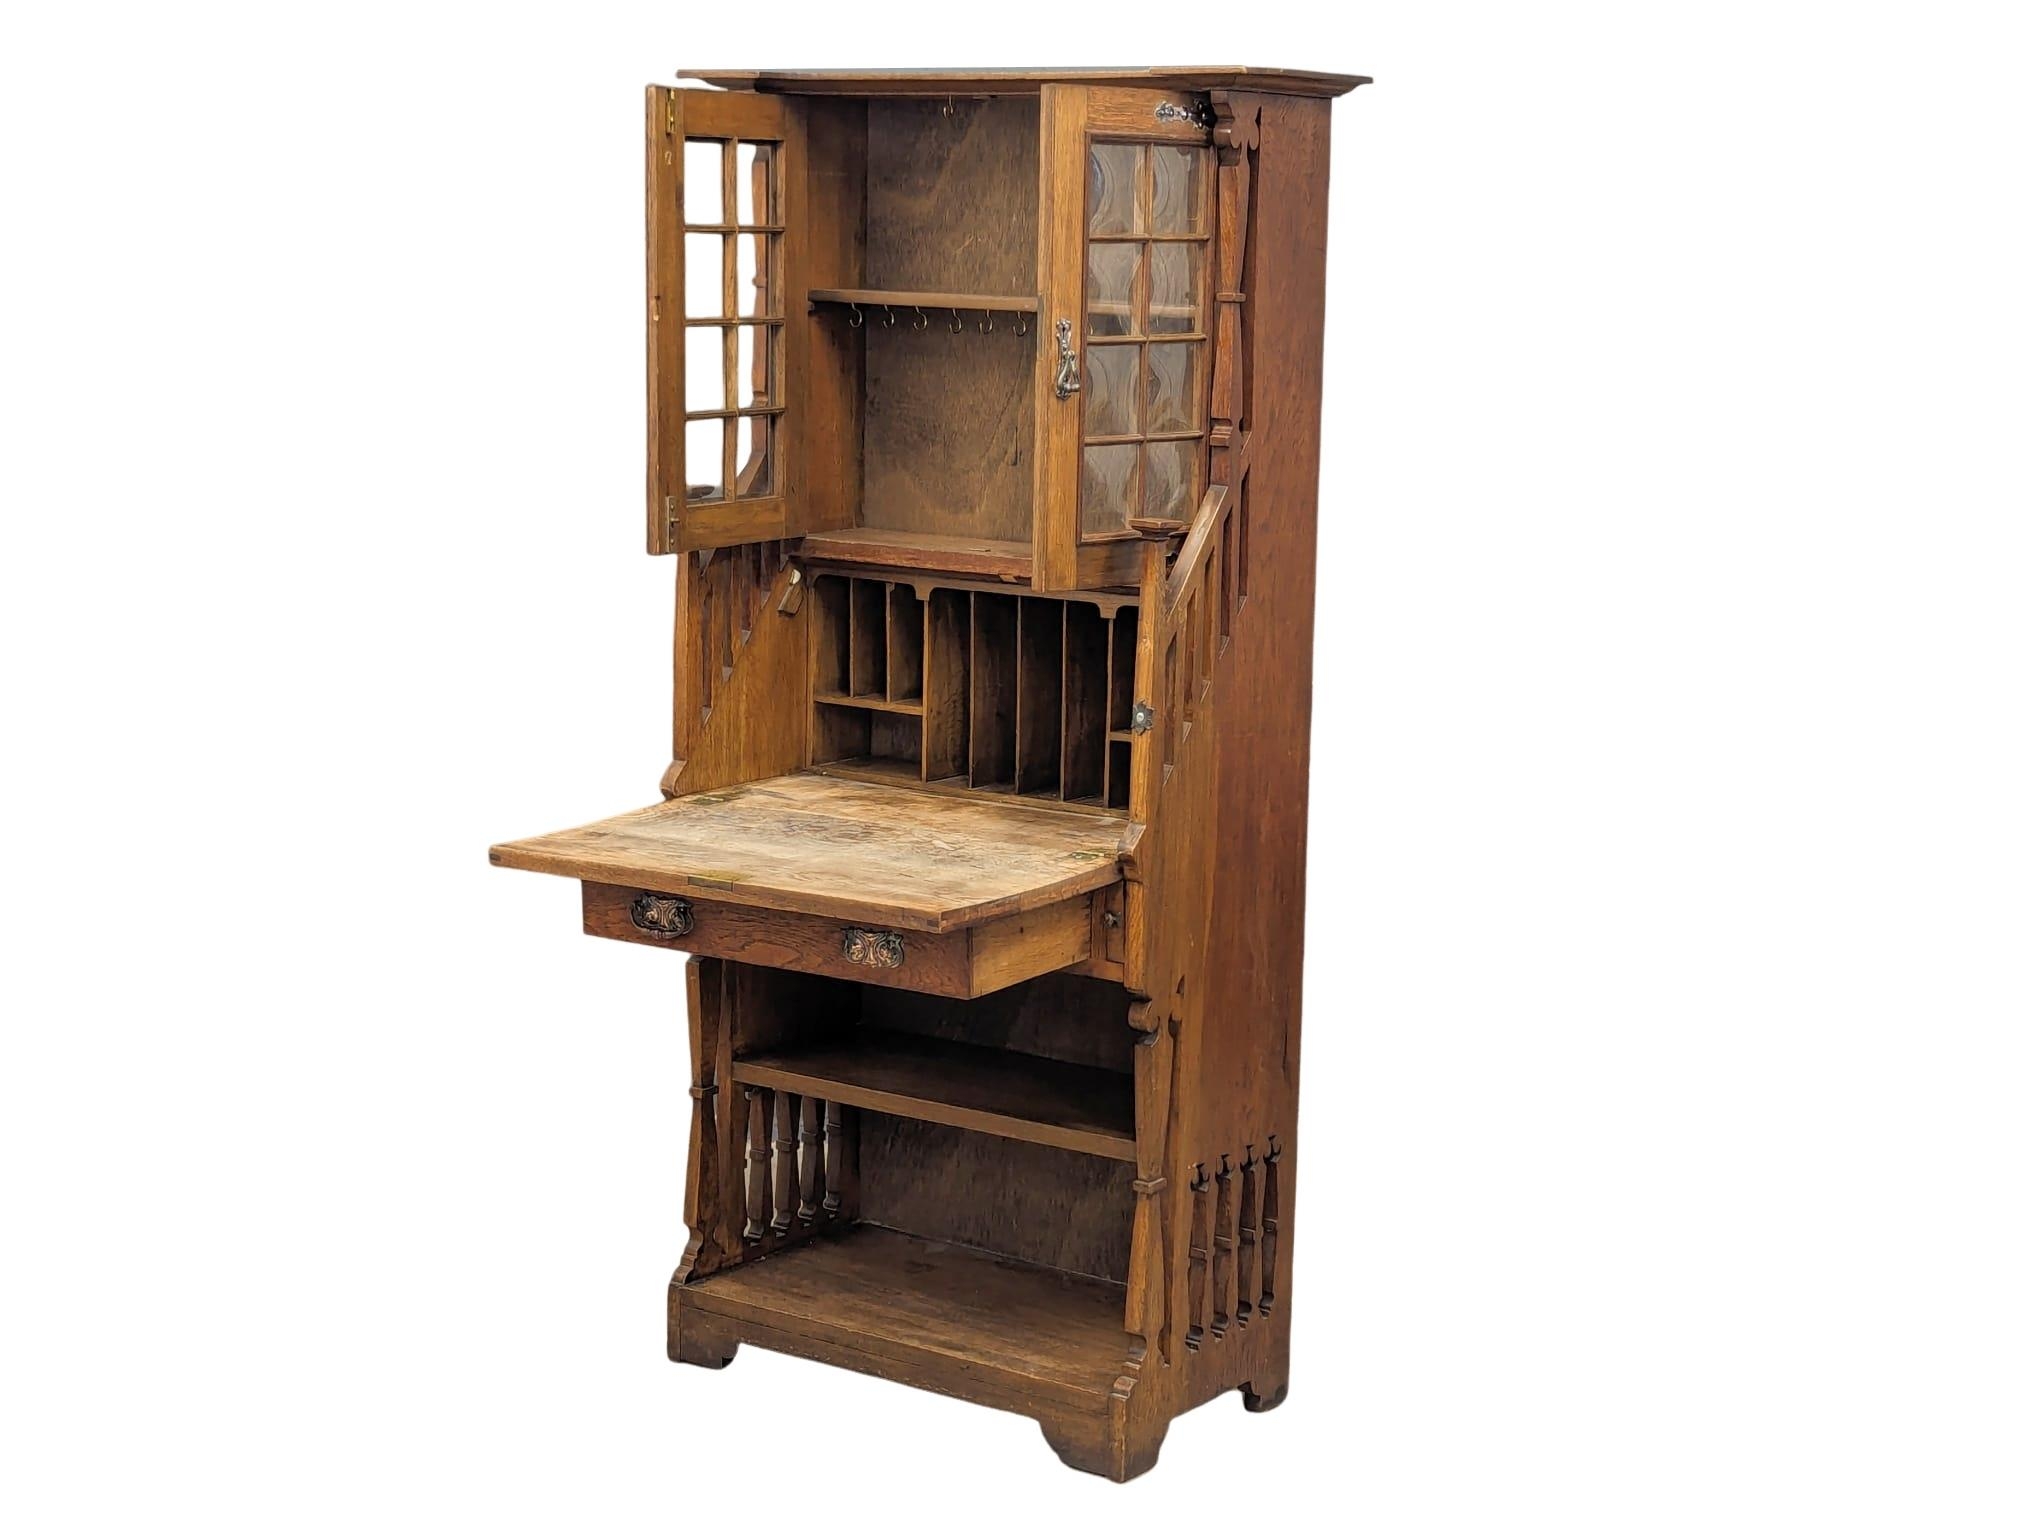 A late 19th Century oak Arts & Crafts bureau bookcase, in the manner of Liberty. Circa 1880-1890s. - Image 10 of 10